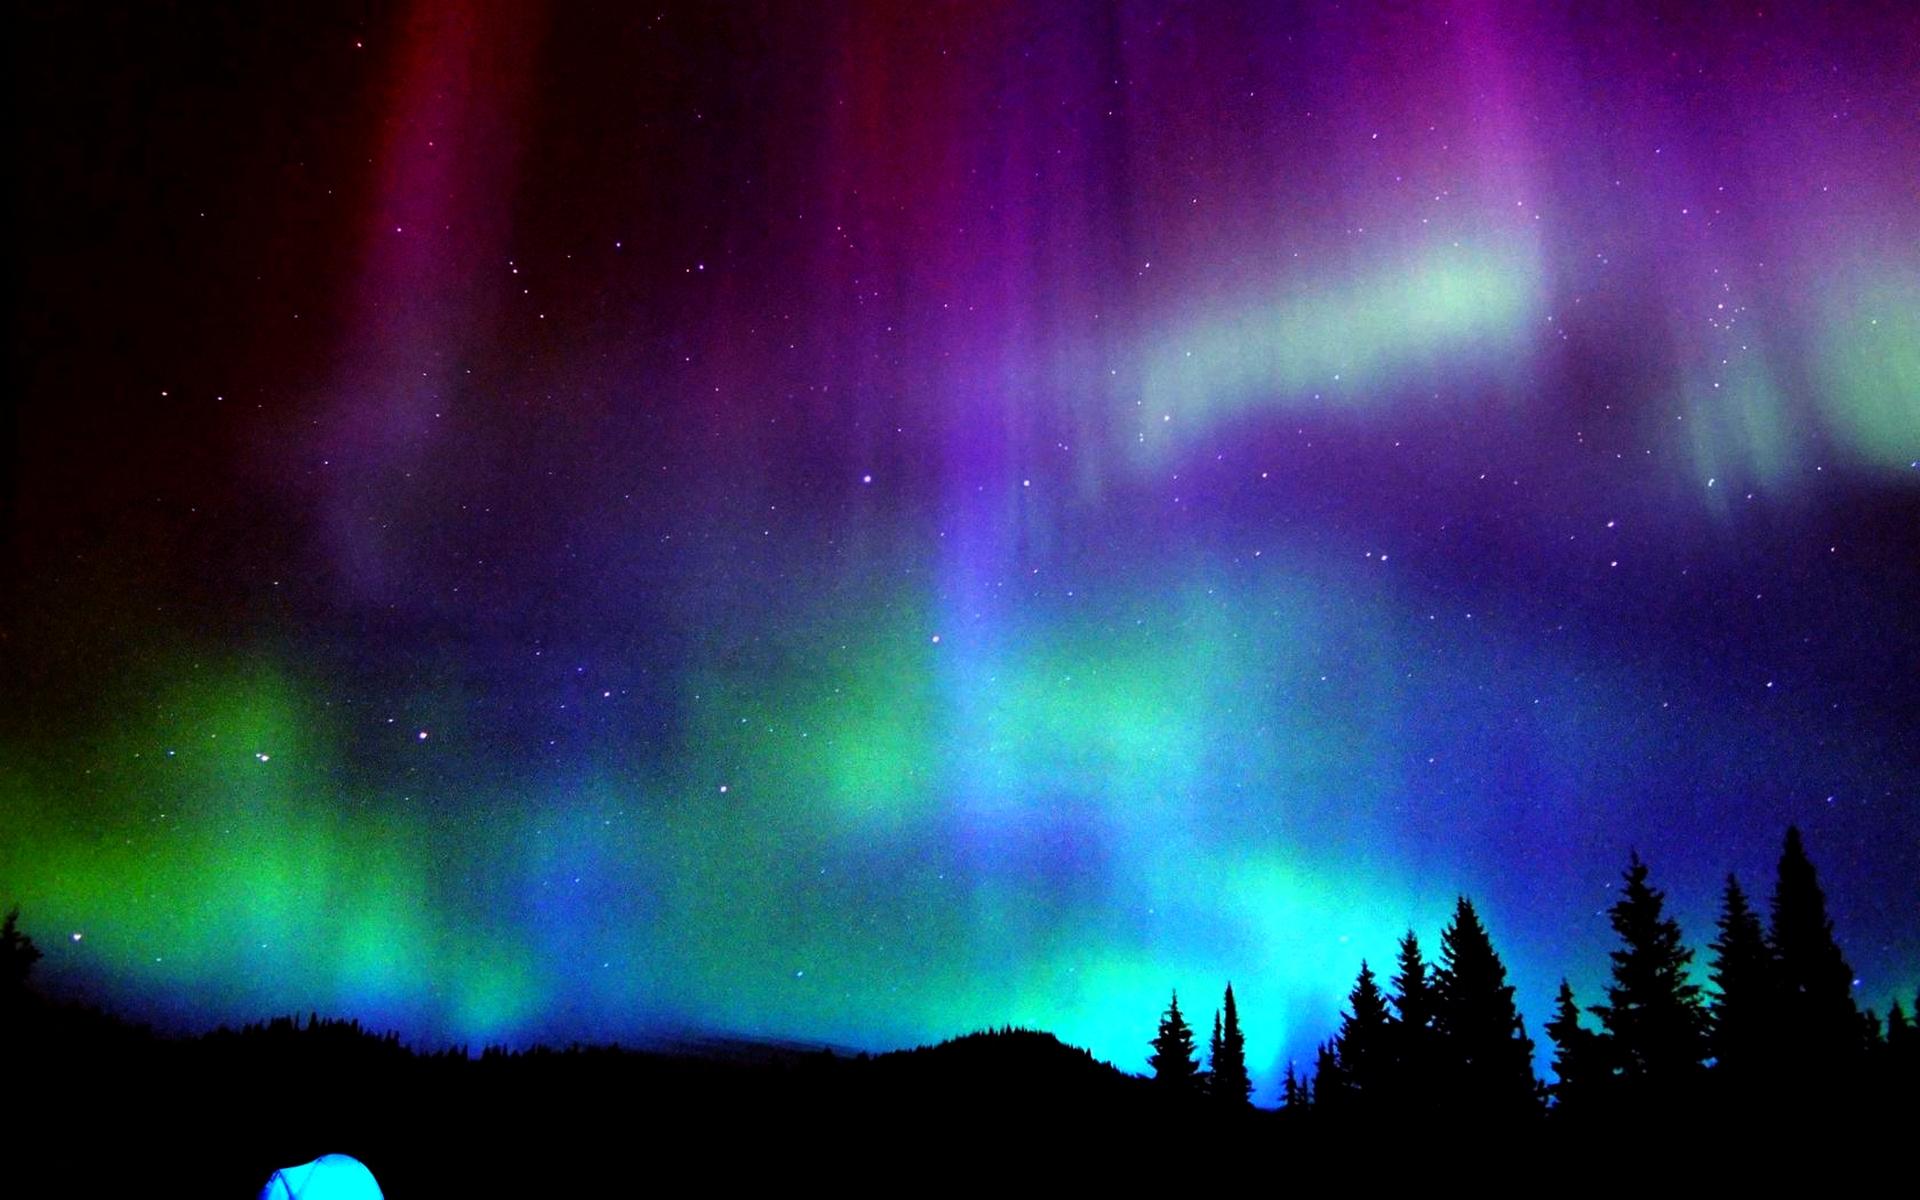 Celebrating the Northern Lights of Aurora Borealis From Behind the